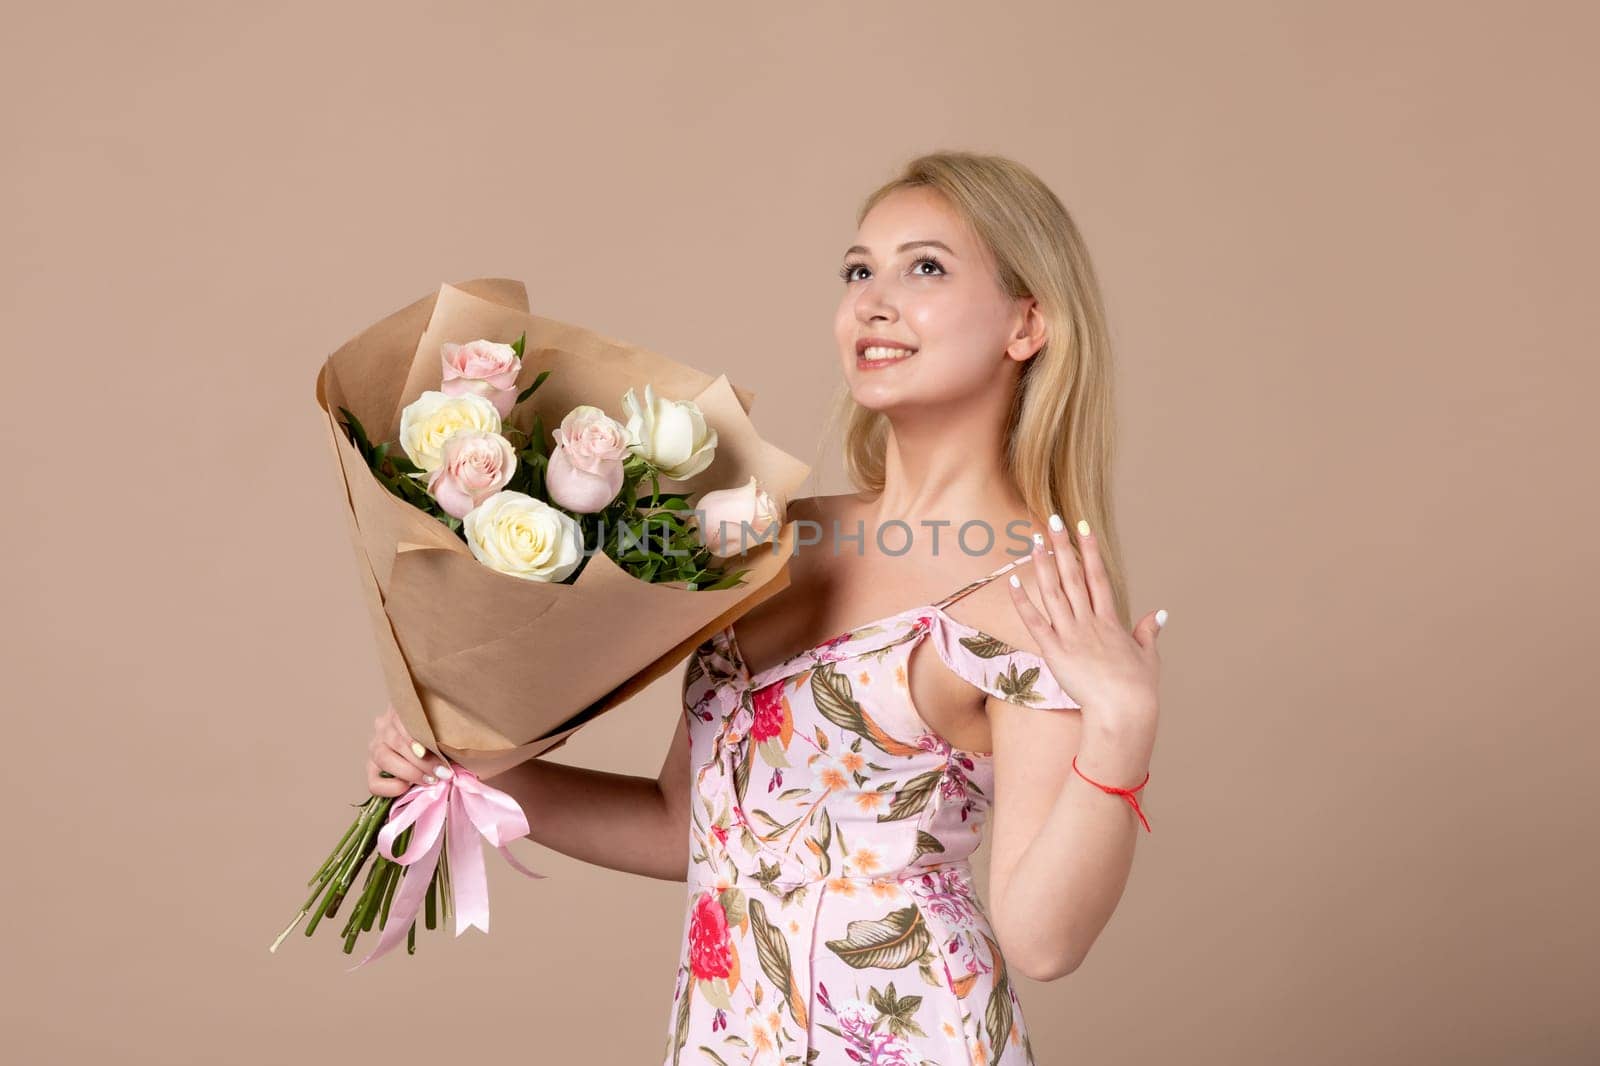 front view young female posing with bouquet of beautiful roses on brown background feminine sensual horizontal march marriage equality woman gift by Kamran